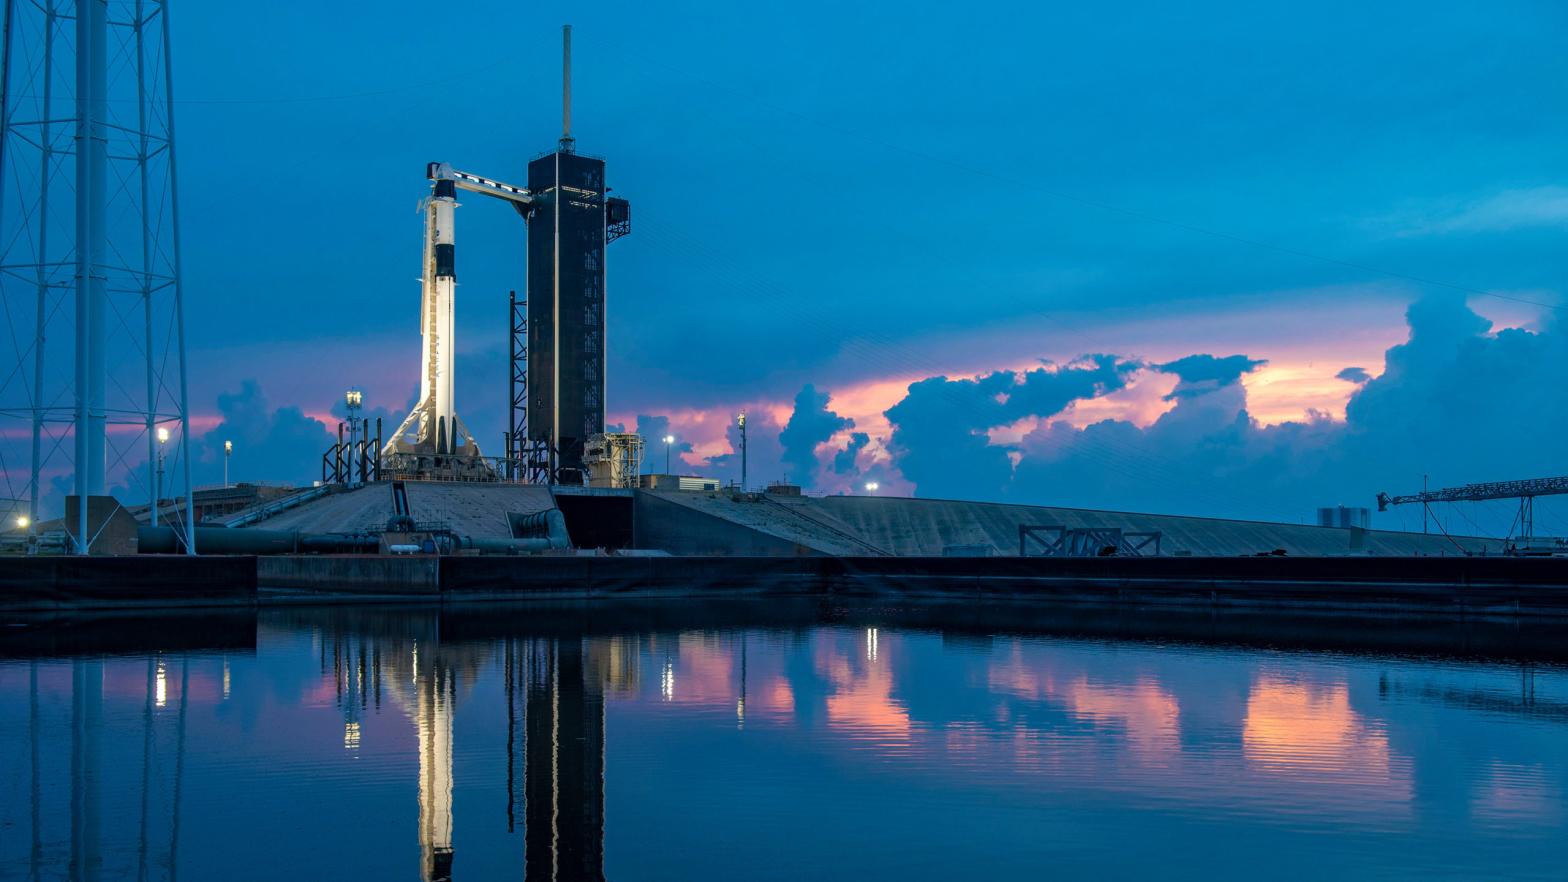 In this handout photo provided by SpaceX, the SpaceX Falcon 9 rocket with the manned Crew Dragon spacecraft sits on launch pad 39A at the Kennedy Space Centre on May 26, 2020 in Cape Canaveral, Florida. (Photo: SpaceX / Handout, Getty Images)